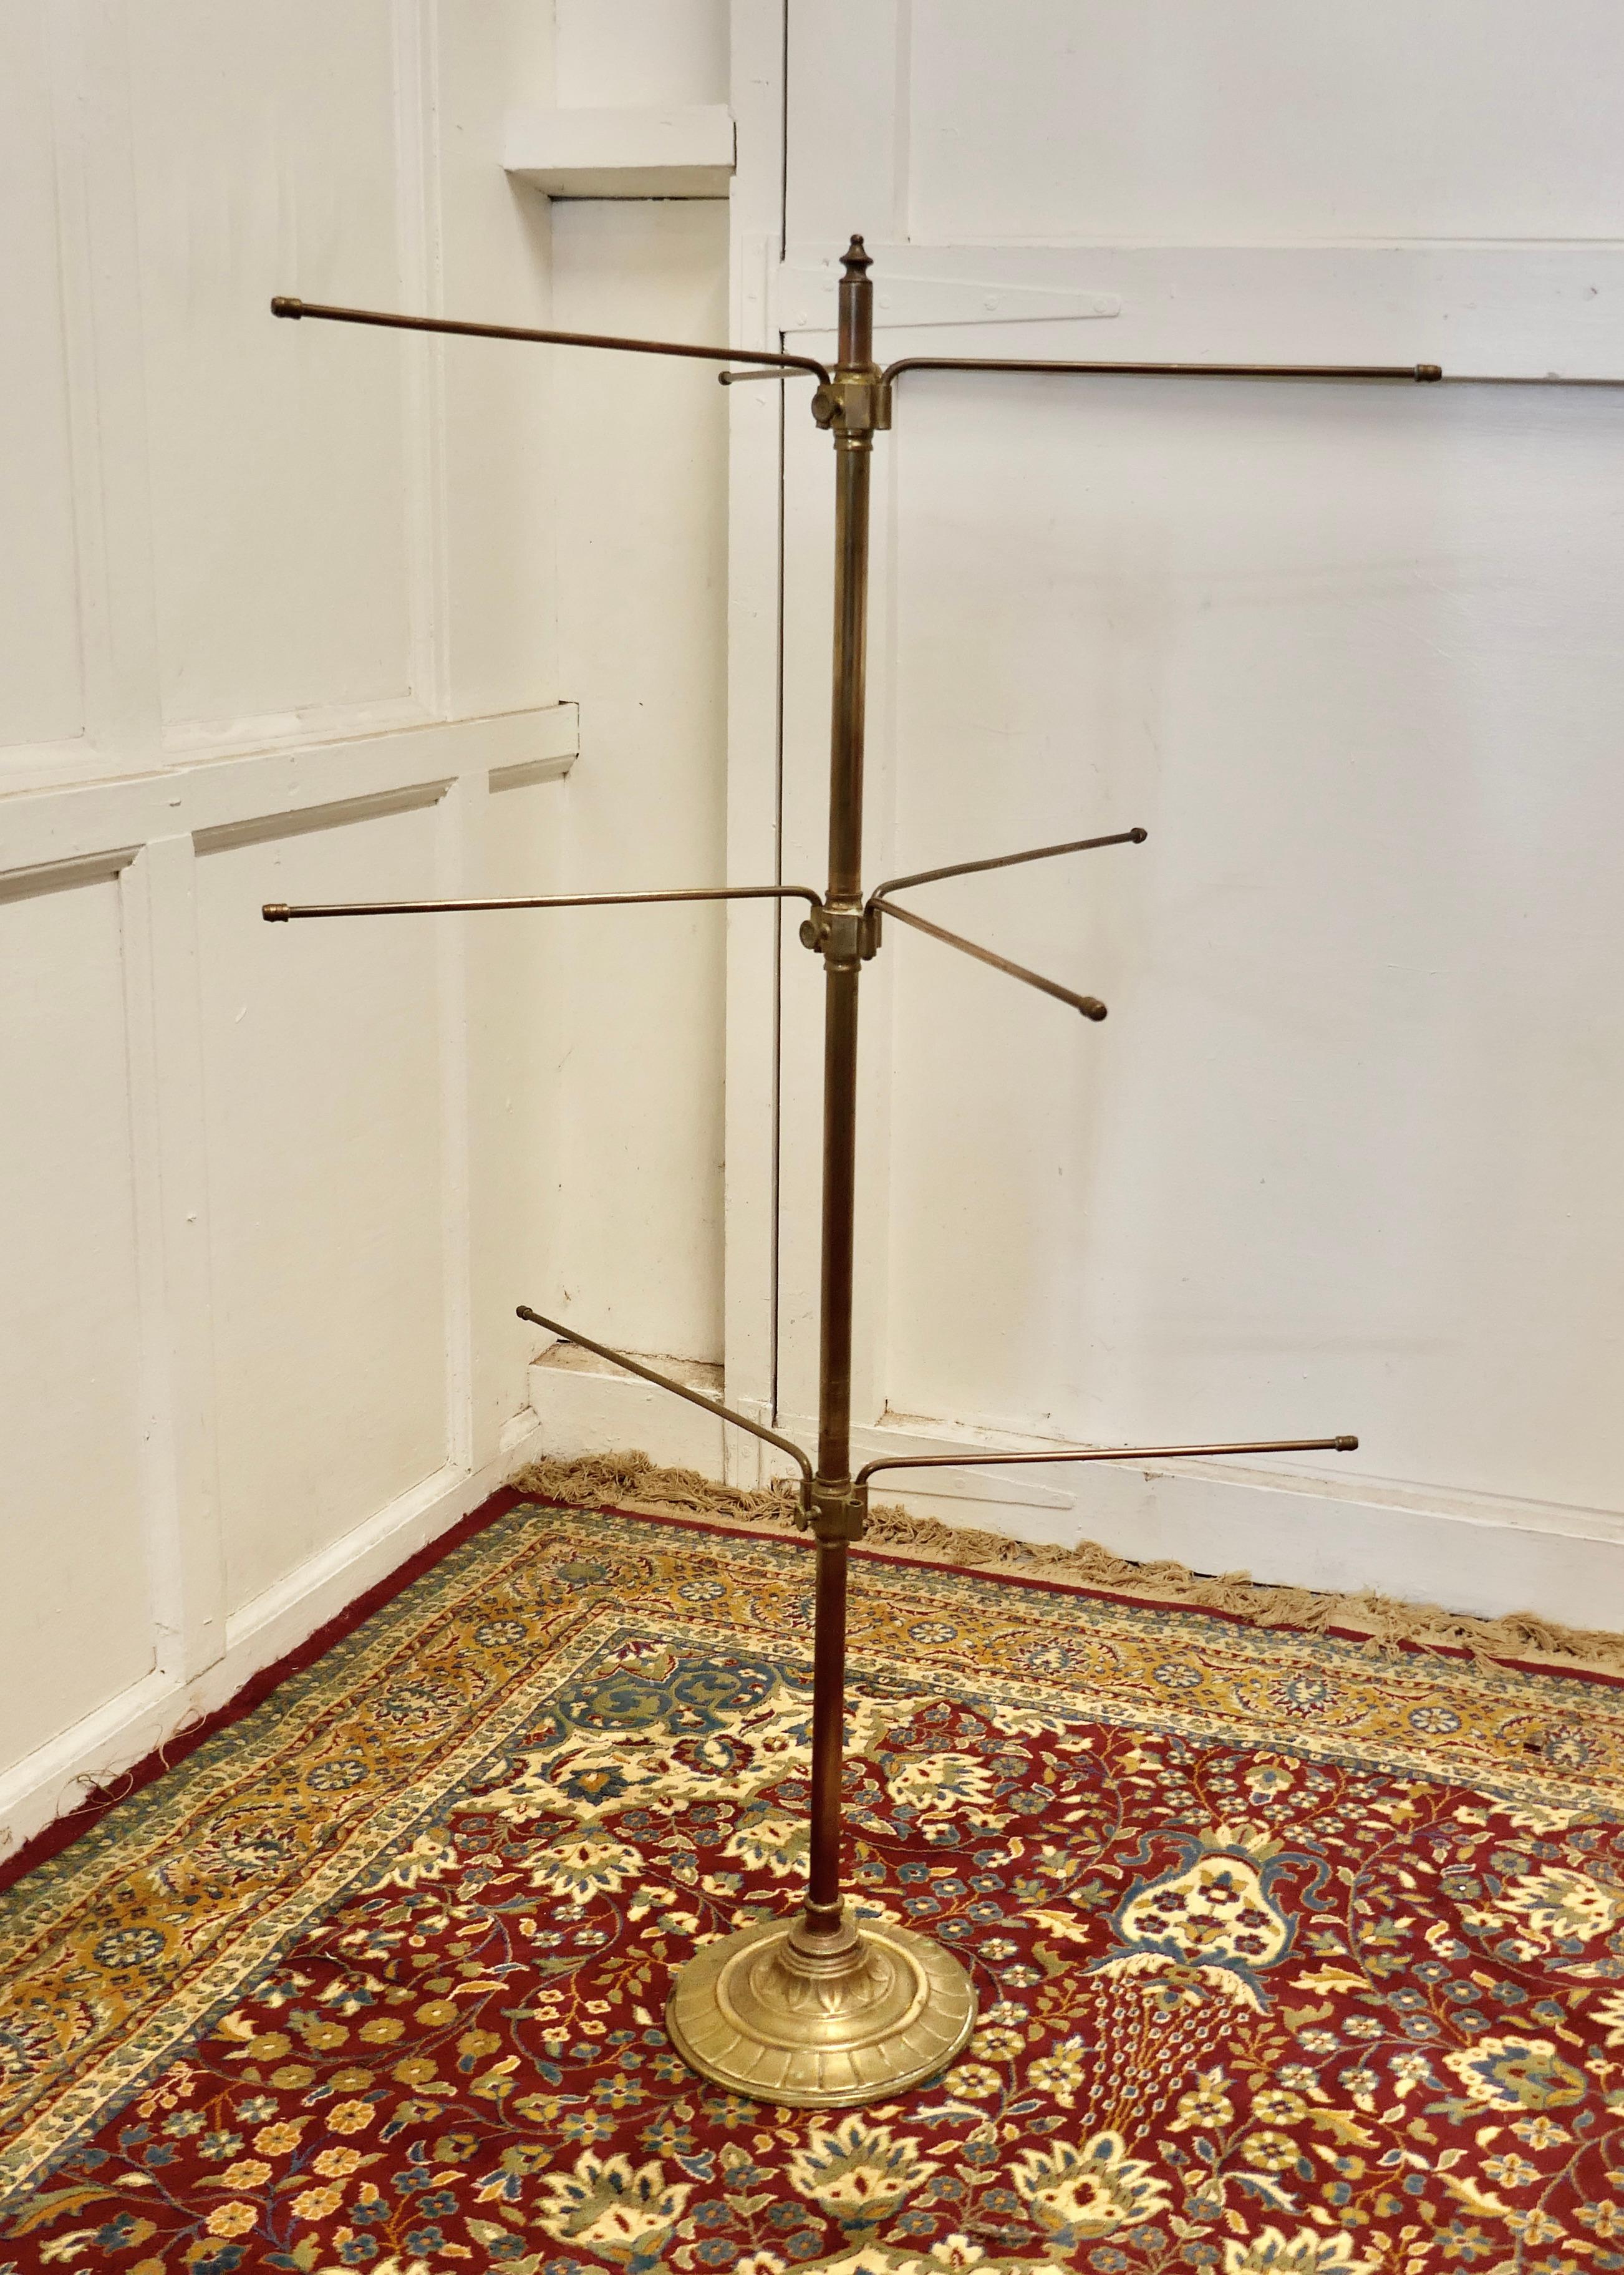 French Art Deco brass haberdashery window display stand

A handy little piece made in brass, the stand has swivel arms with can be set at any angle from the central column, there are 3 of these arms from 2 levels and 2 from the other 

The stand